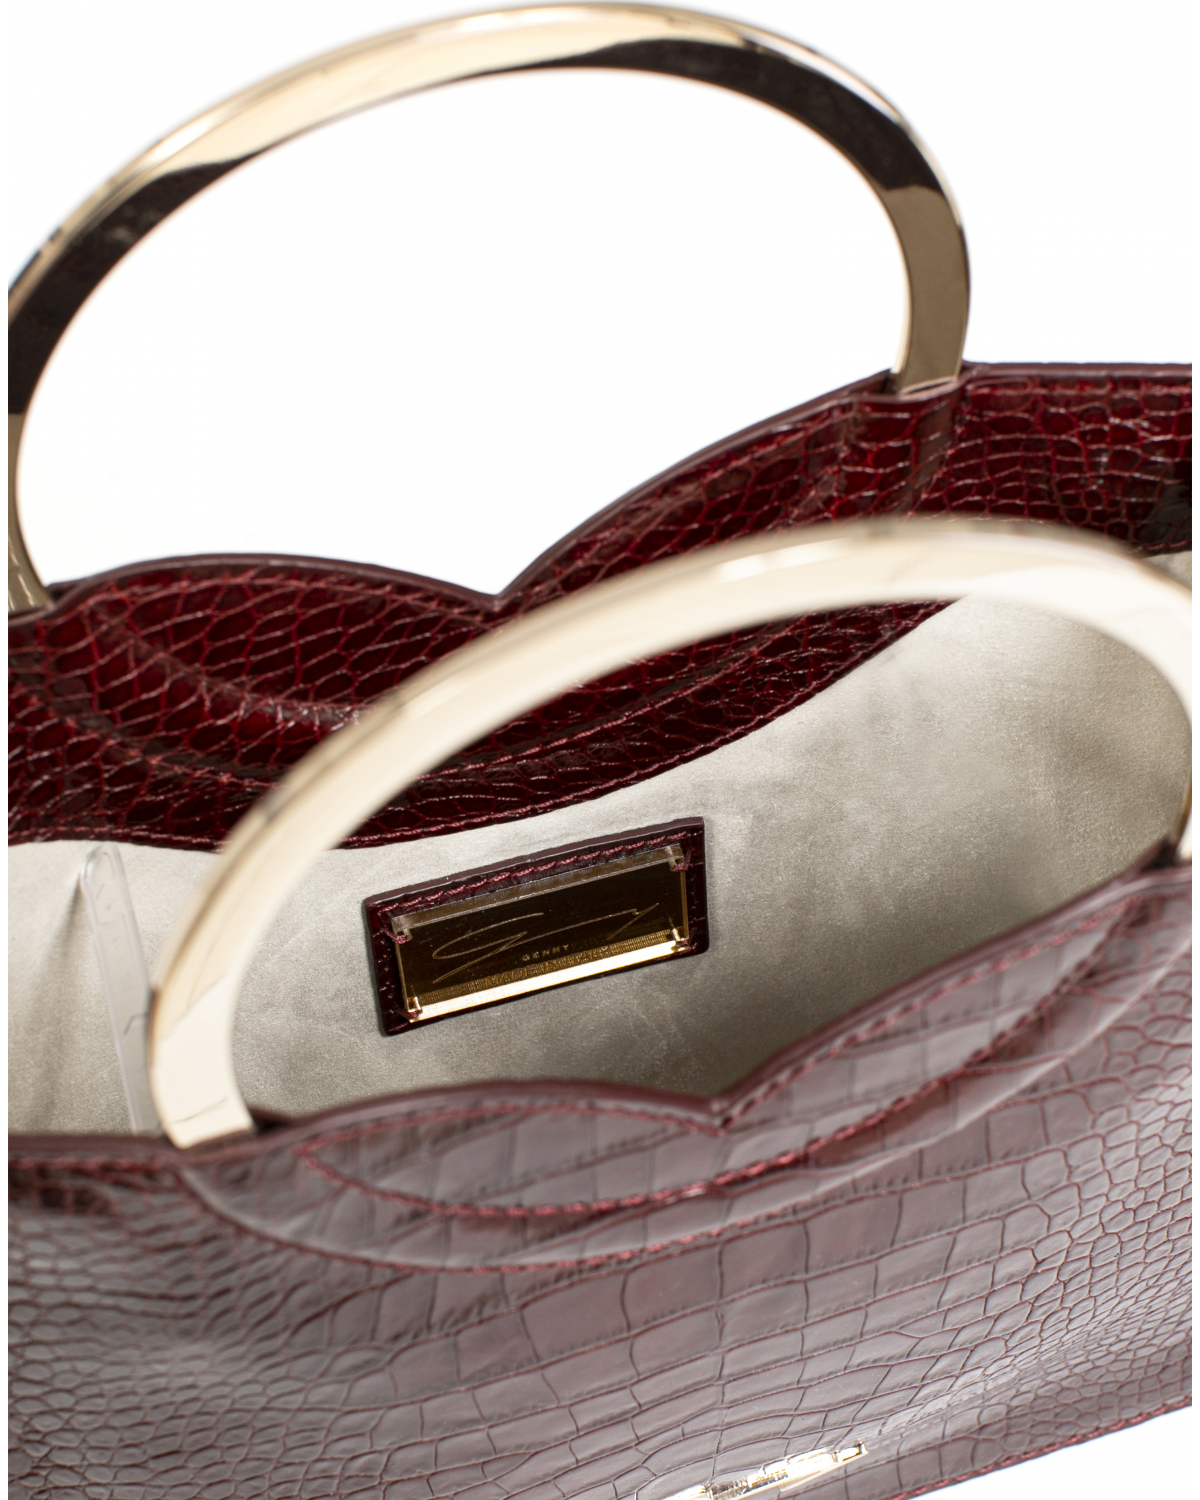 Small square burgundy leather bag with round metal handles | Accessories, -40% | Genny